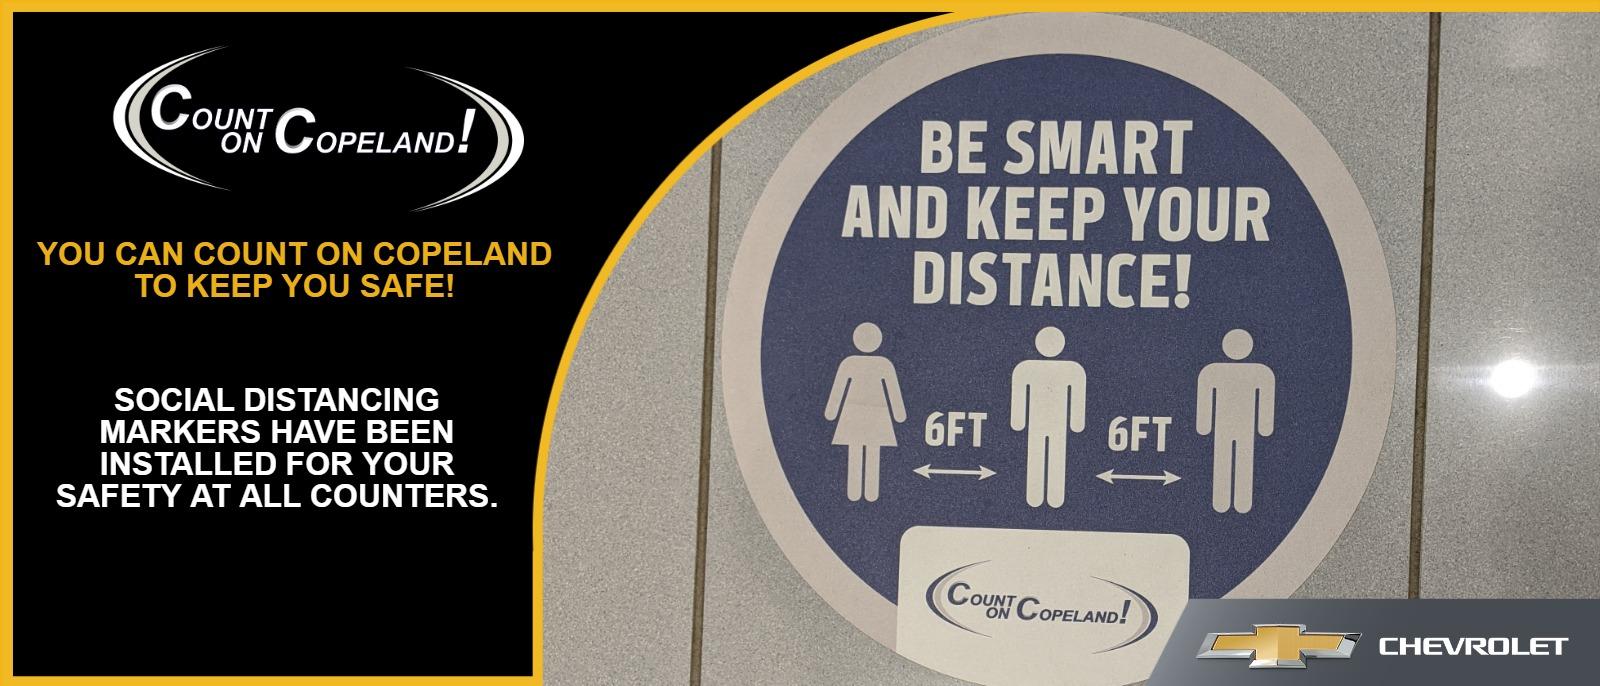 Be Smart and Keep Your Distance!